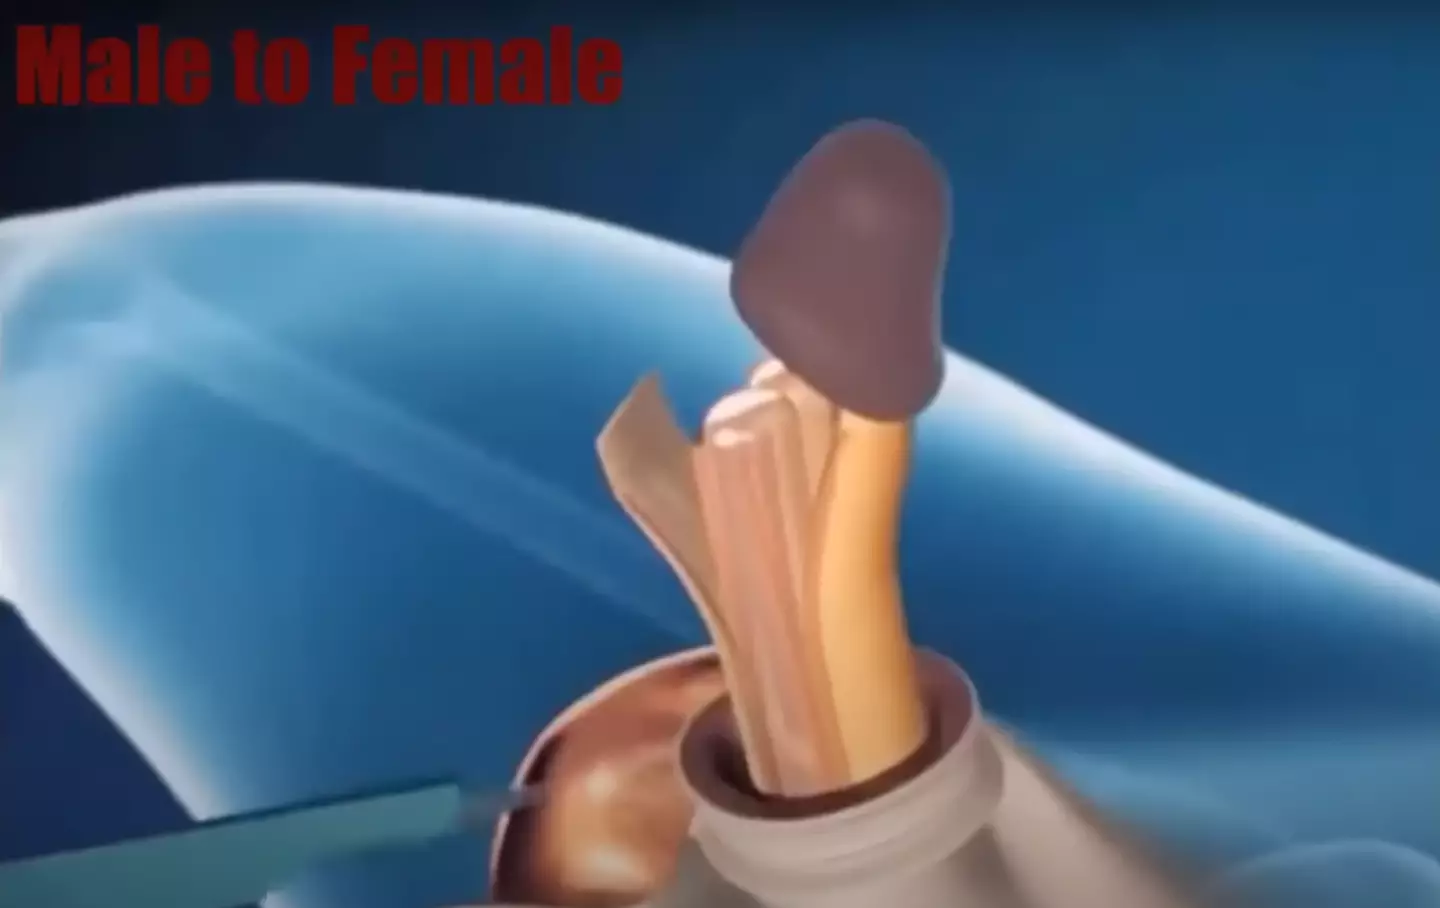 The head of the penis is used to make a clitoris.